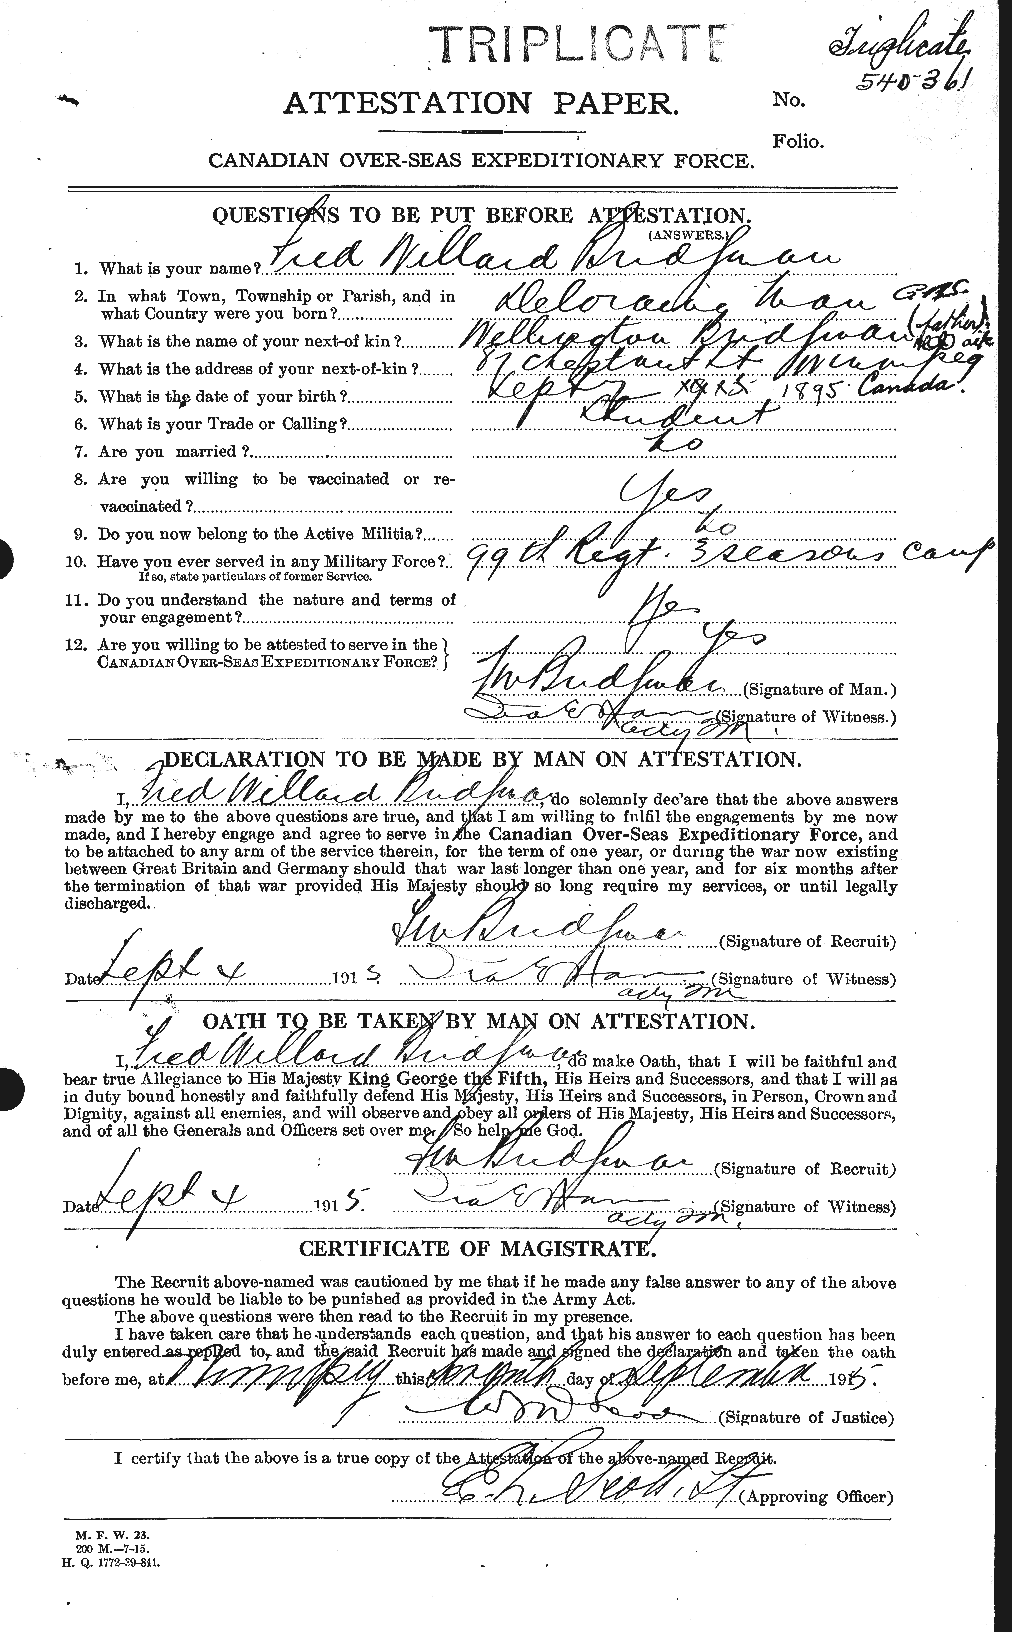 Personnel Records of the First World War - CEF 259866a